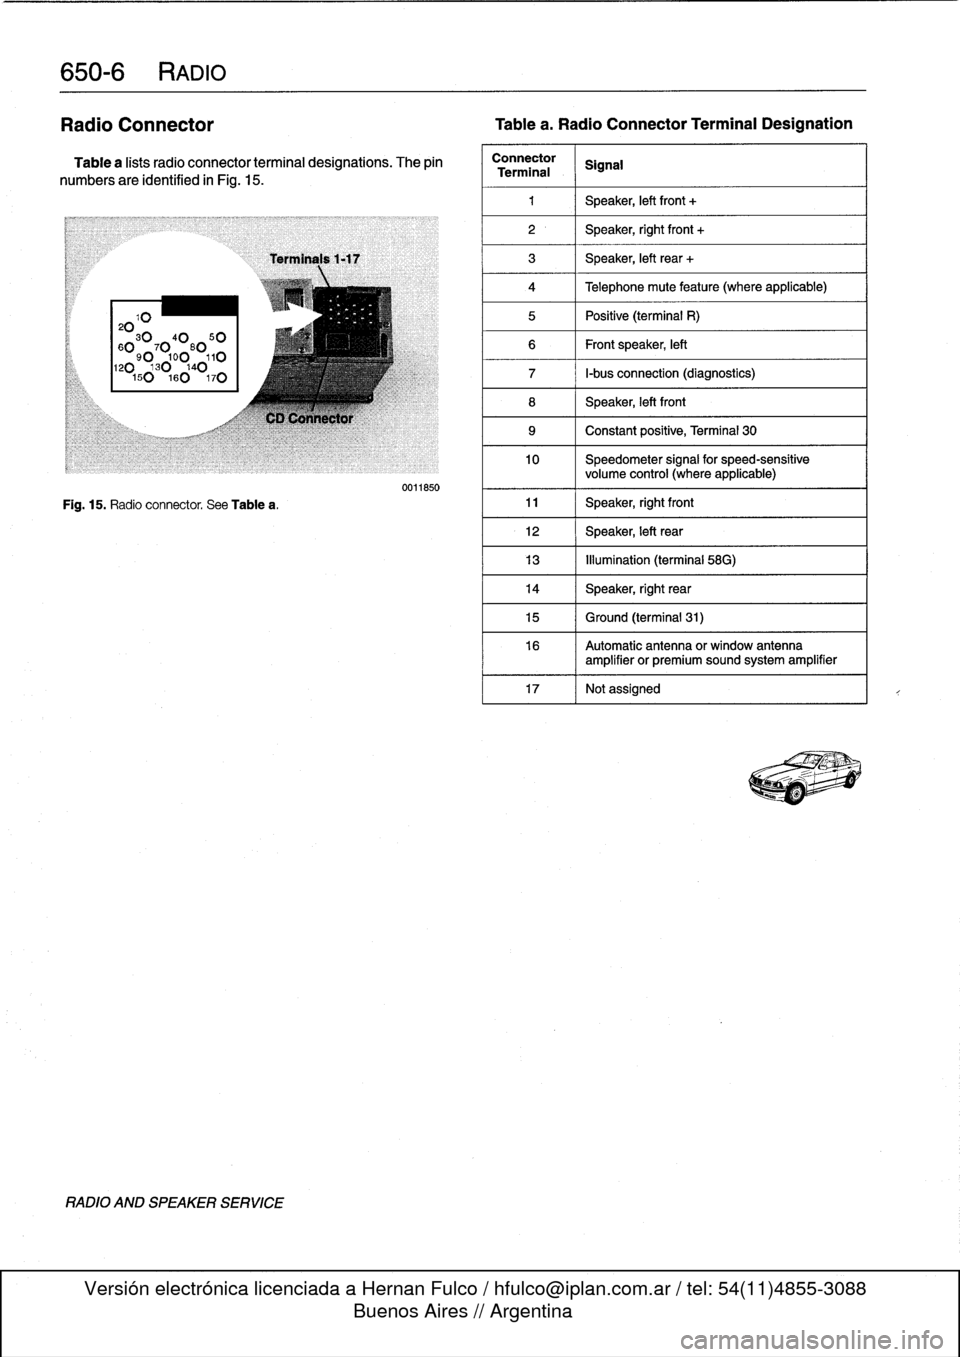 BMW 323i 1998 E36 Workshop Manual 
650-
6
RADIO

Radio
Connector

	

Tablea
.
Radio
Connector
Terminal
Designation

Table
a
lists
radio
connector
terminal
designations
.
The
pin

numbers
are
identified
in
Fig
.
15
.

20103040
50

60
9